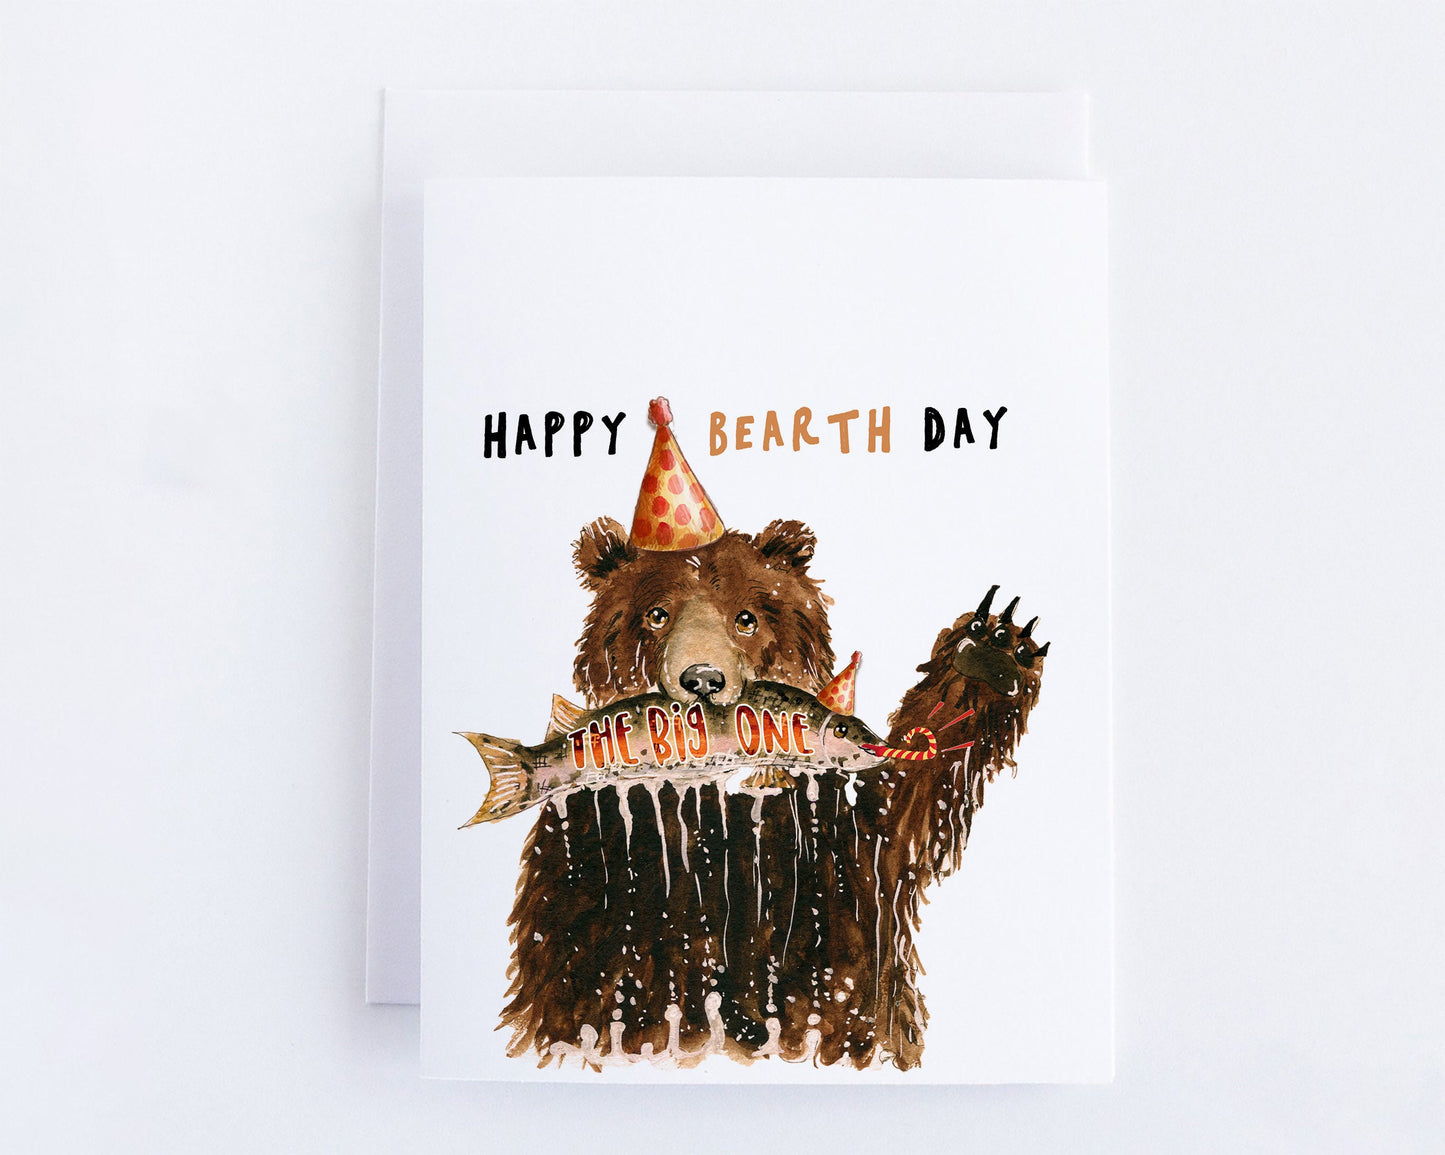 Happy Birthday Card - Grizzly Bear Fishing The Big One